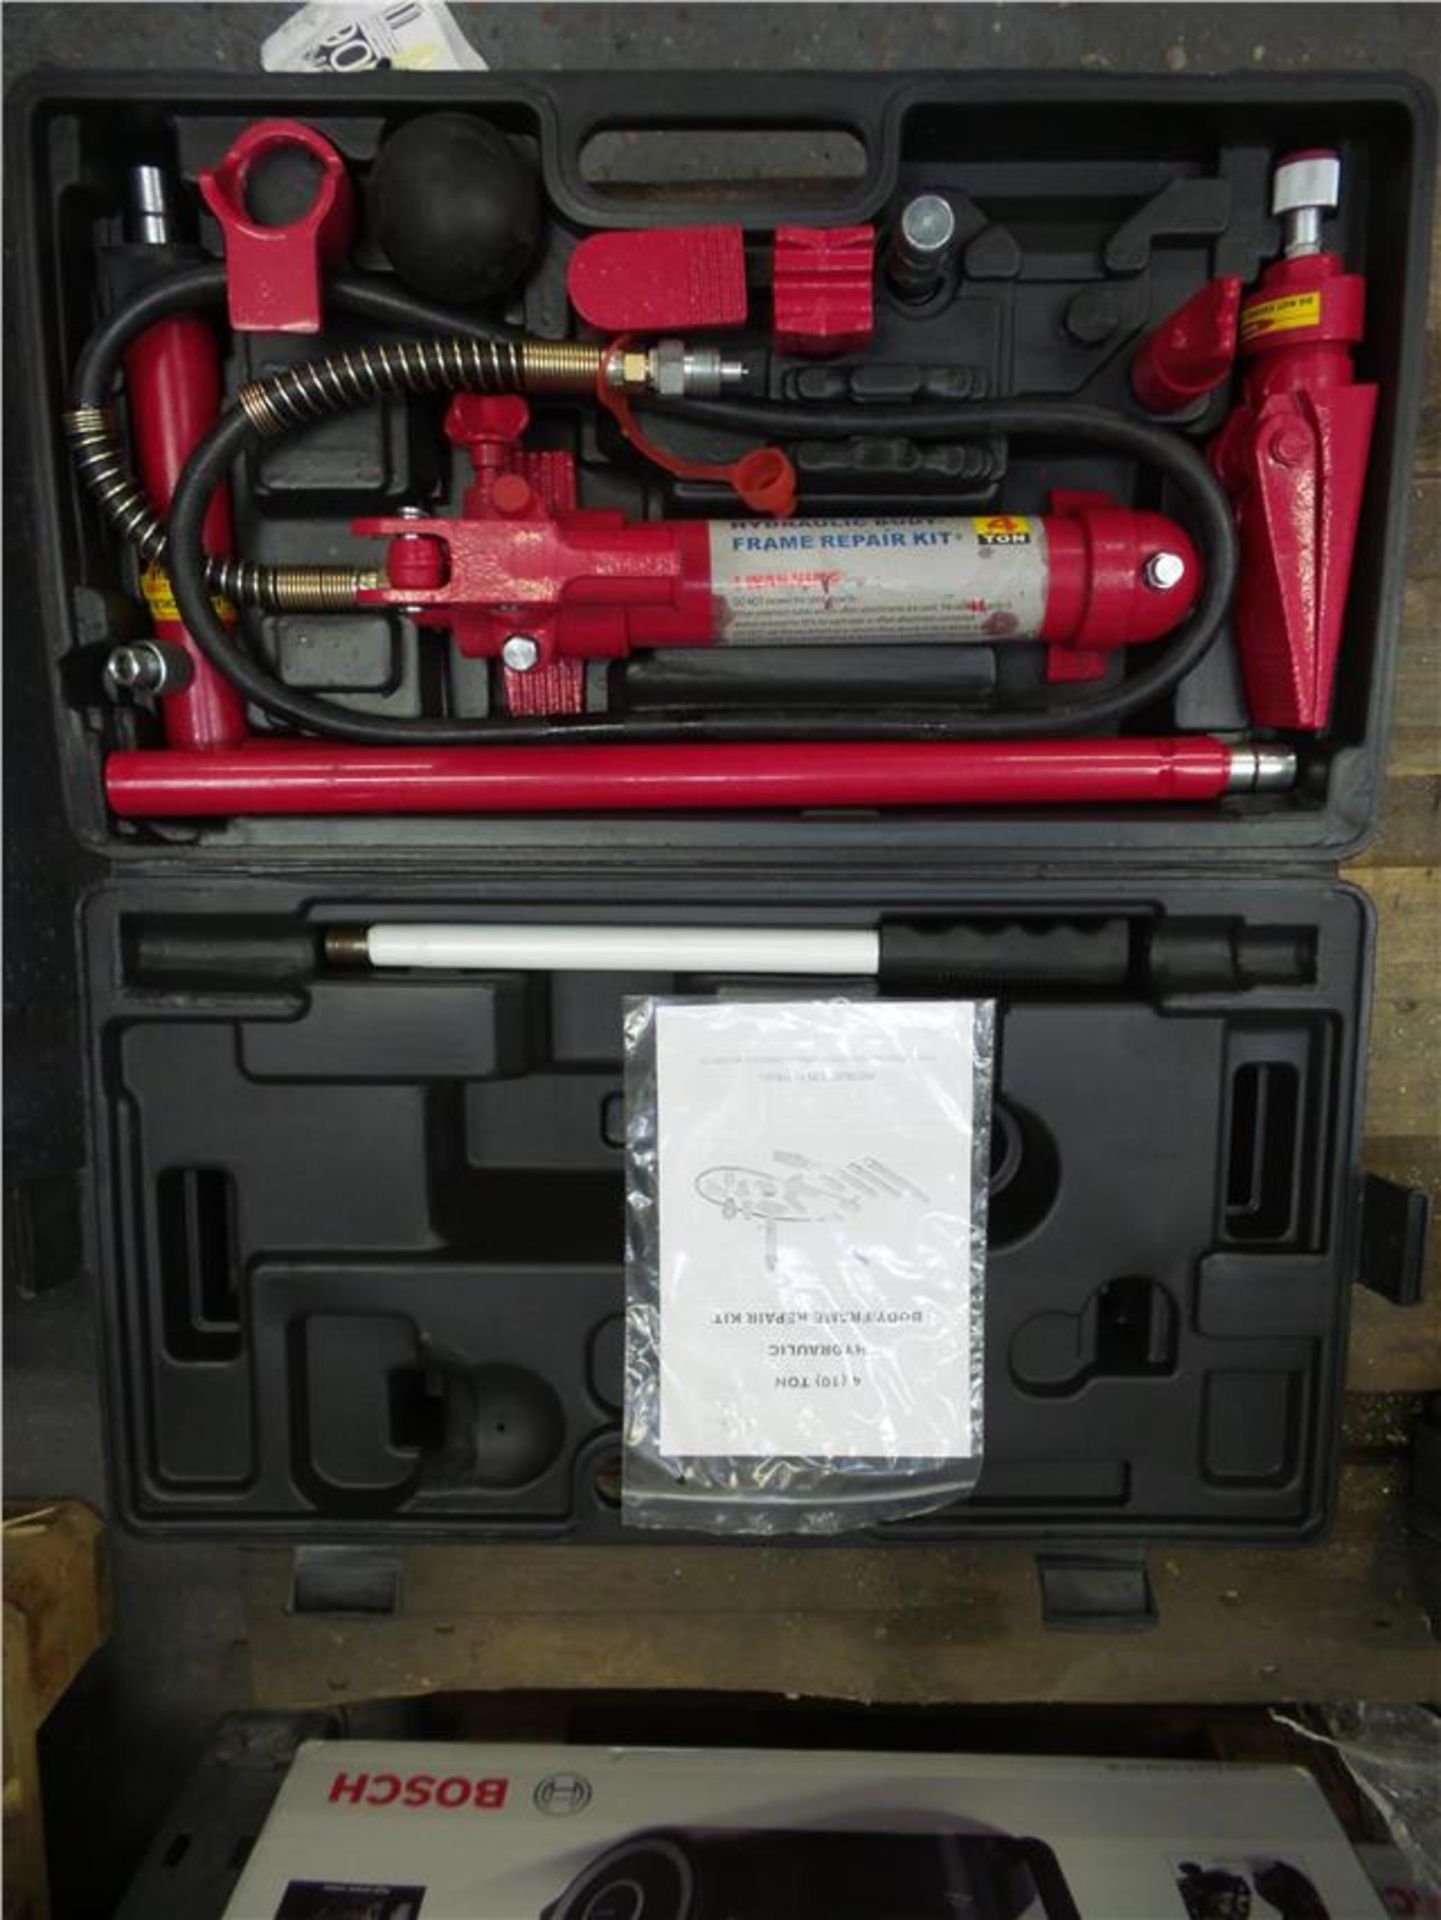 4 Ton Body Repair Kit (WORKING 0876) This is missing 2 attachments (see images Parts 3 & 9) ** Ex-